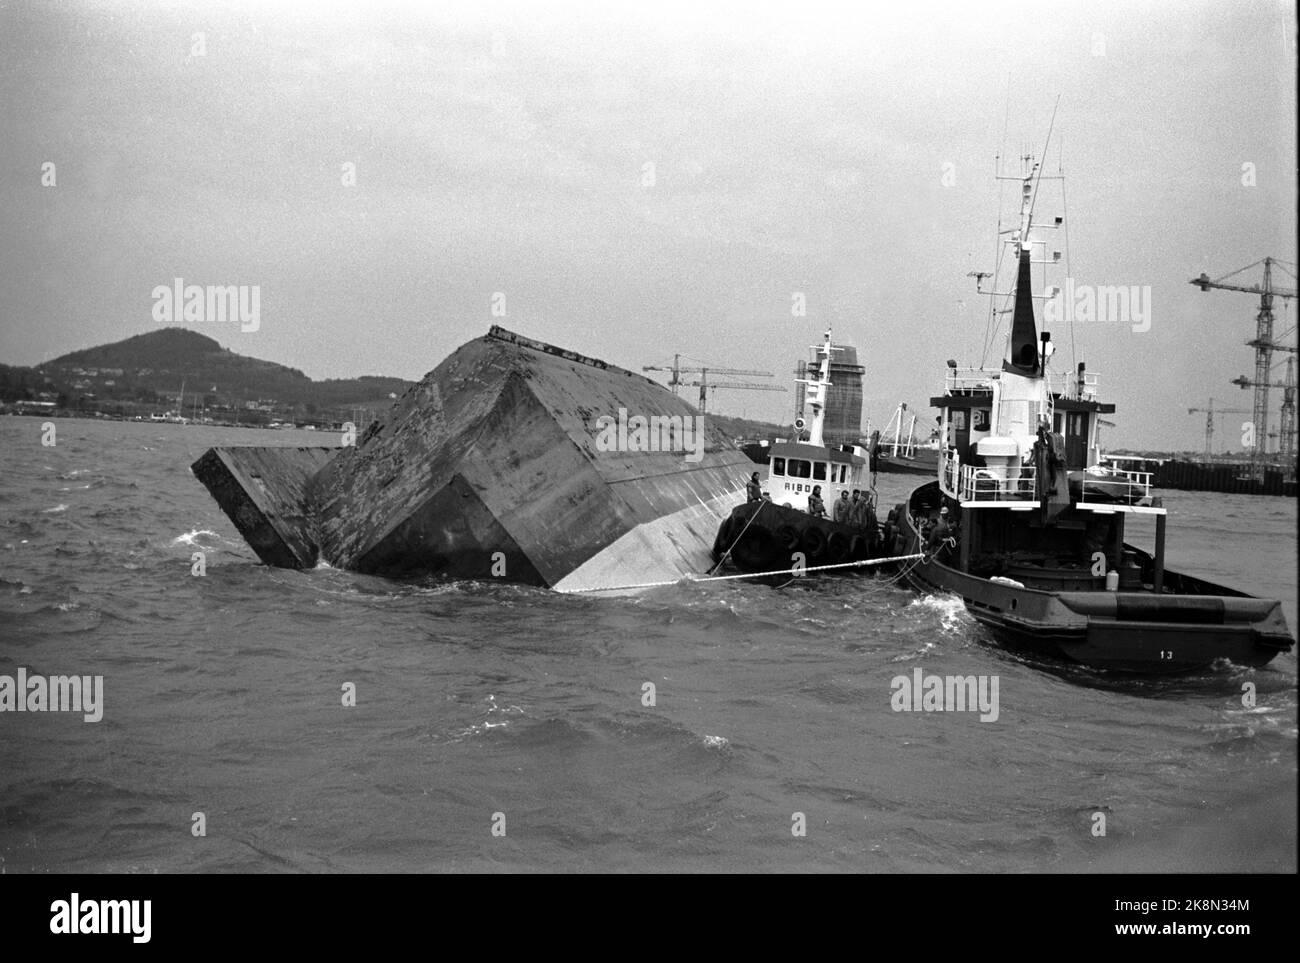 Stavanger 19851105: The cement vessel Concem crashed during the work on Gullfaks B Platform in the Gandsfjord, and 10 people perished. Here the overturned cement bargain. Ships with divers are looking for those killed. Photo: Jens O. Kvale / NTB / NTB Stock Photo